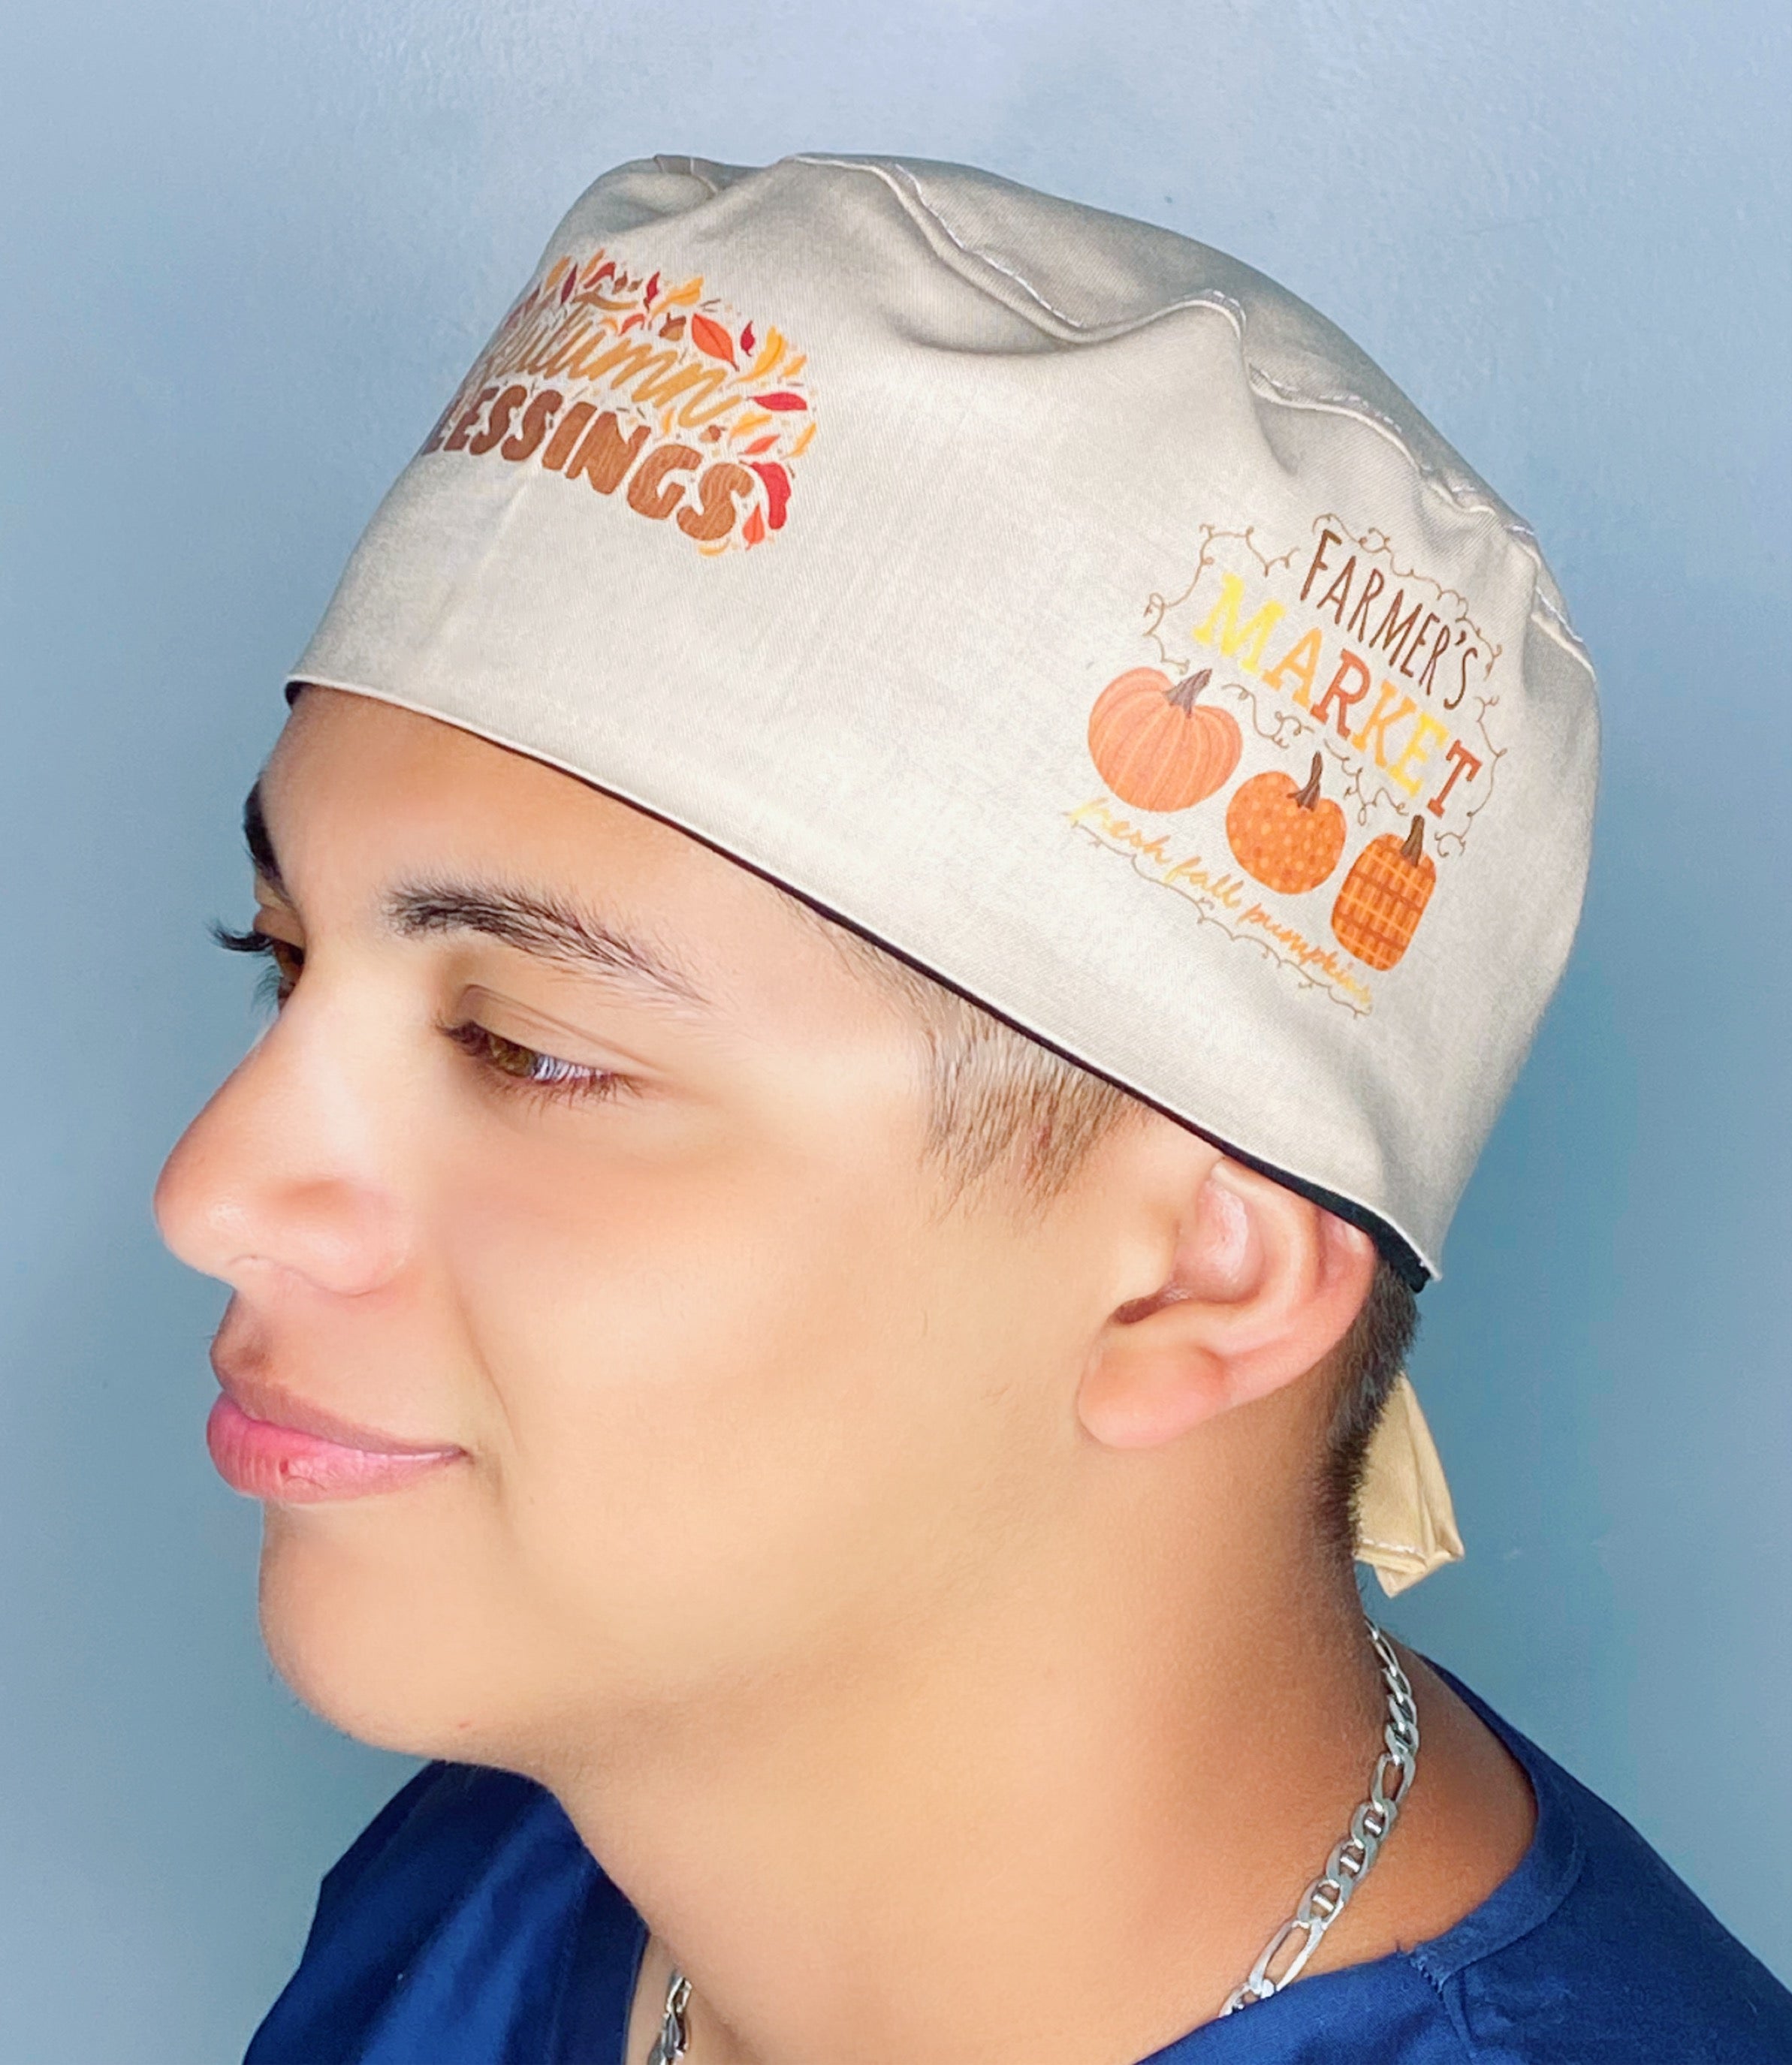 Autumn Blessings, Farmers Market, Gather Together Happy Thanksgiving Themed Custom Solid Color Unisex Scrub Cap